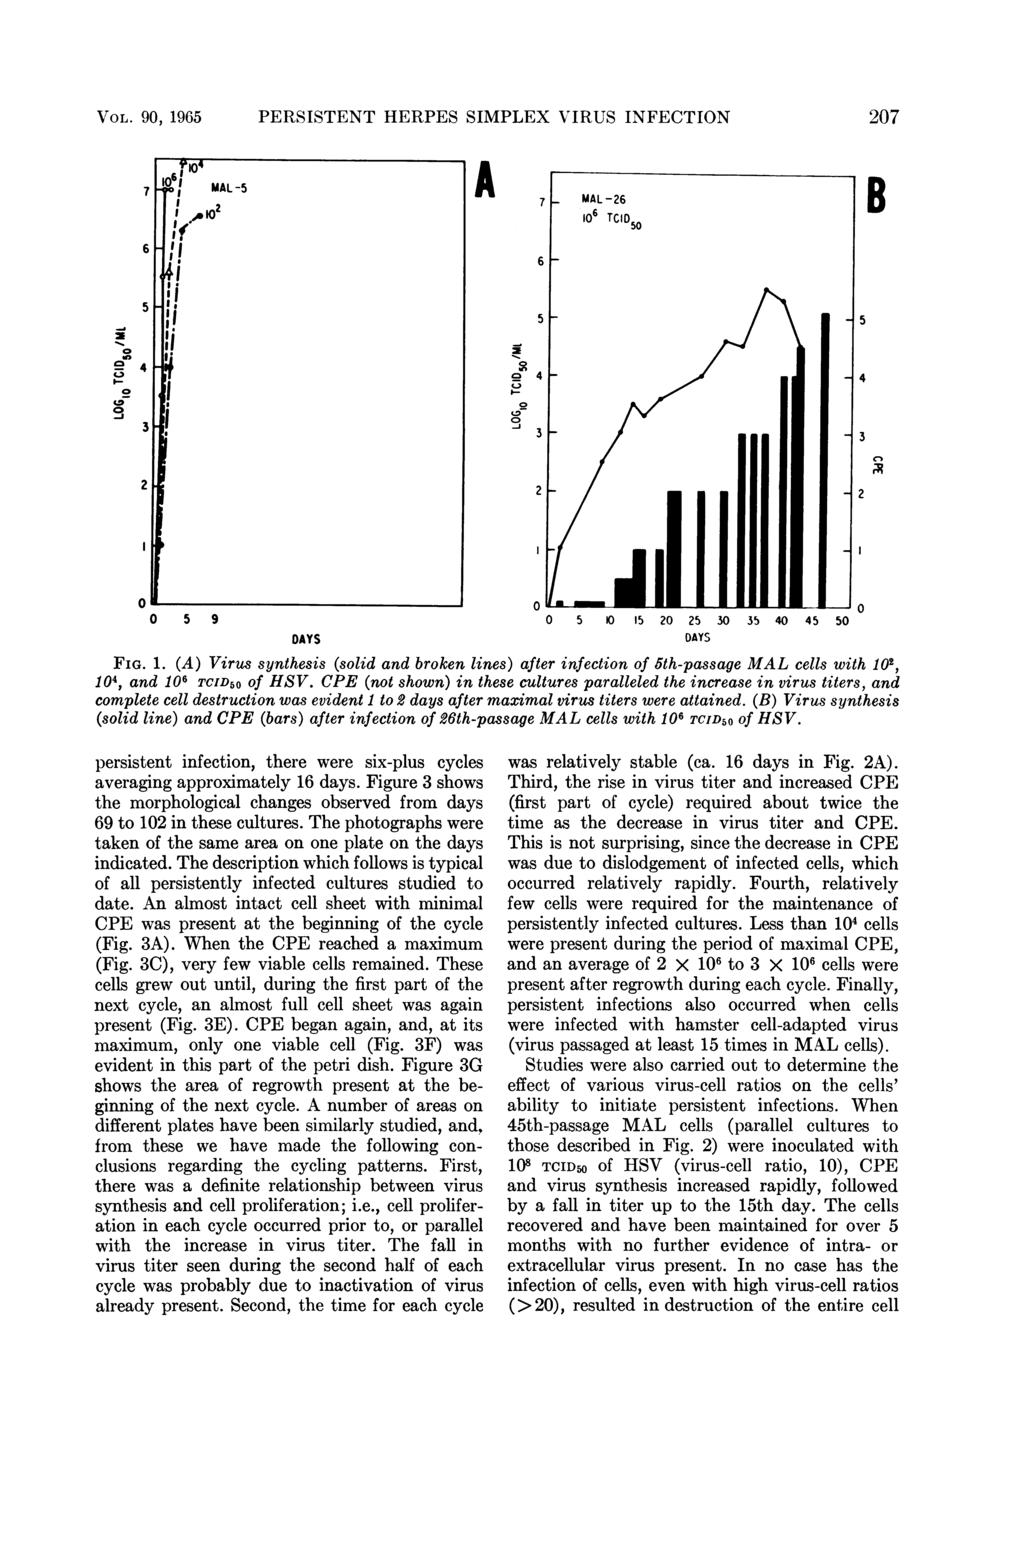 VOL. 90, 1965 PERSISTENT HERPES SIMPLEX VIRUS INFECTION 207 A B a I- C) i 5: e 4 3 0 5 9 0 5 10 15 20 25 30 35 40 45 50 DAYS DAYS FIG. 1. (A) Virus synthesis (solid and broken lines) after infection of 5th-passage MAL cells with 102, 104, and 106 TcID50 of HSV.